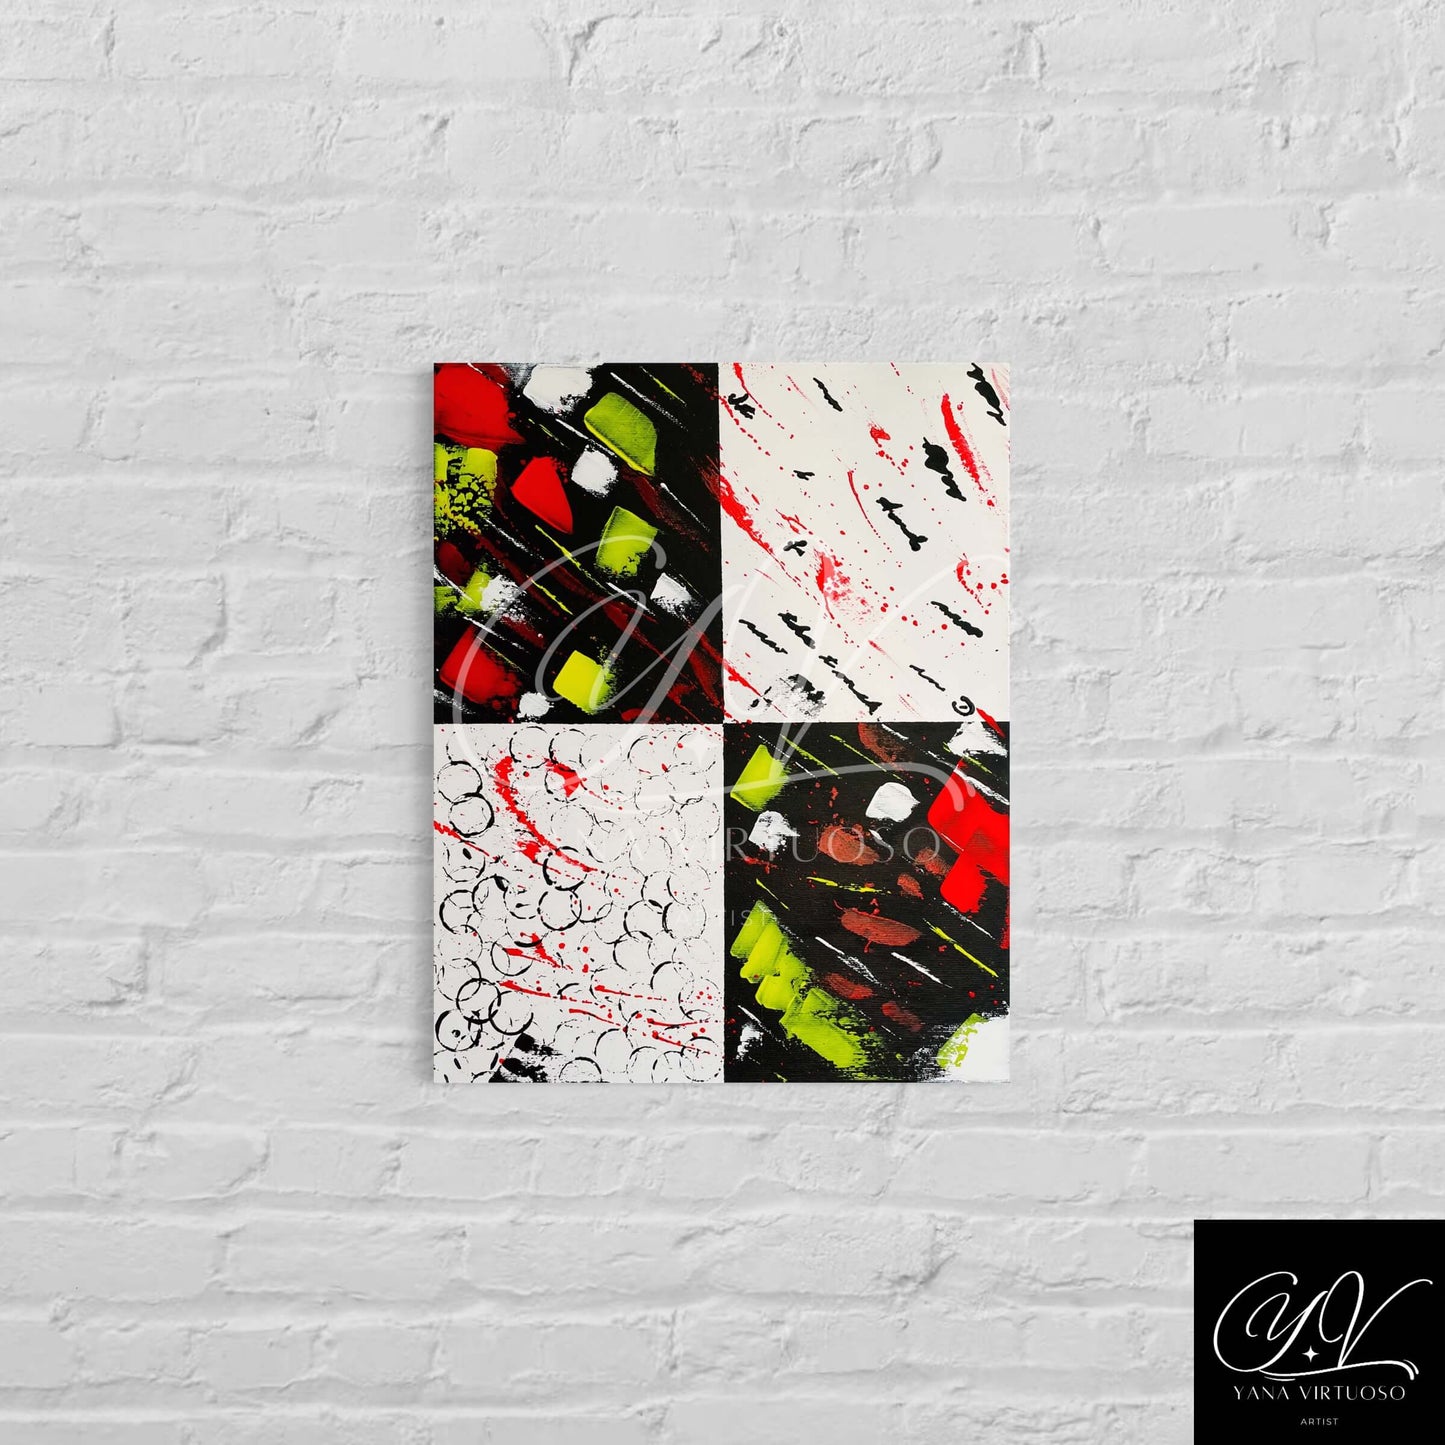 Medium shot of "Flight of Human Emotions" painting hanging on a wall, showcasing the contrast between its vibrant reds and yellows against the black and white sections, portraying the intricacies of human emotions.